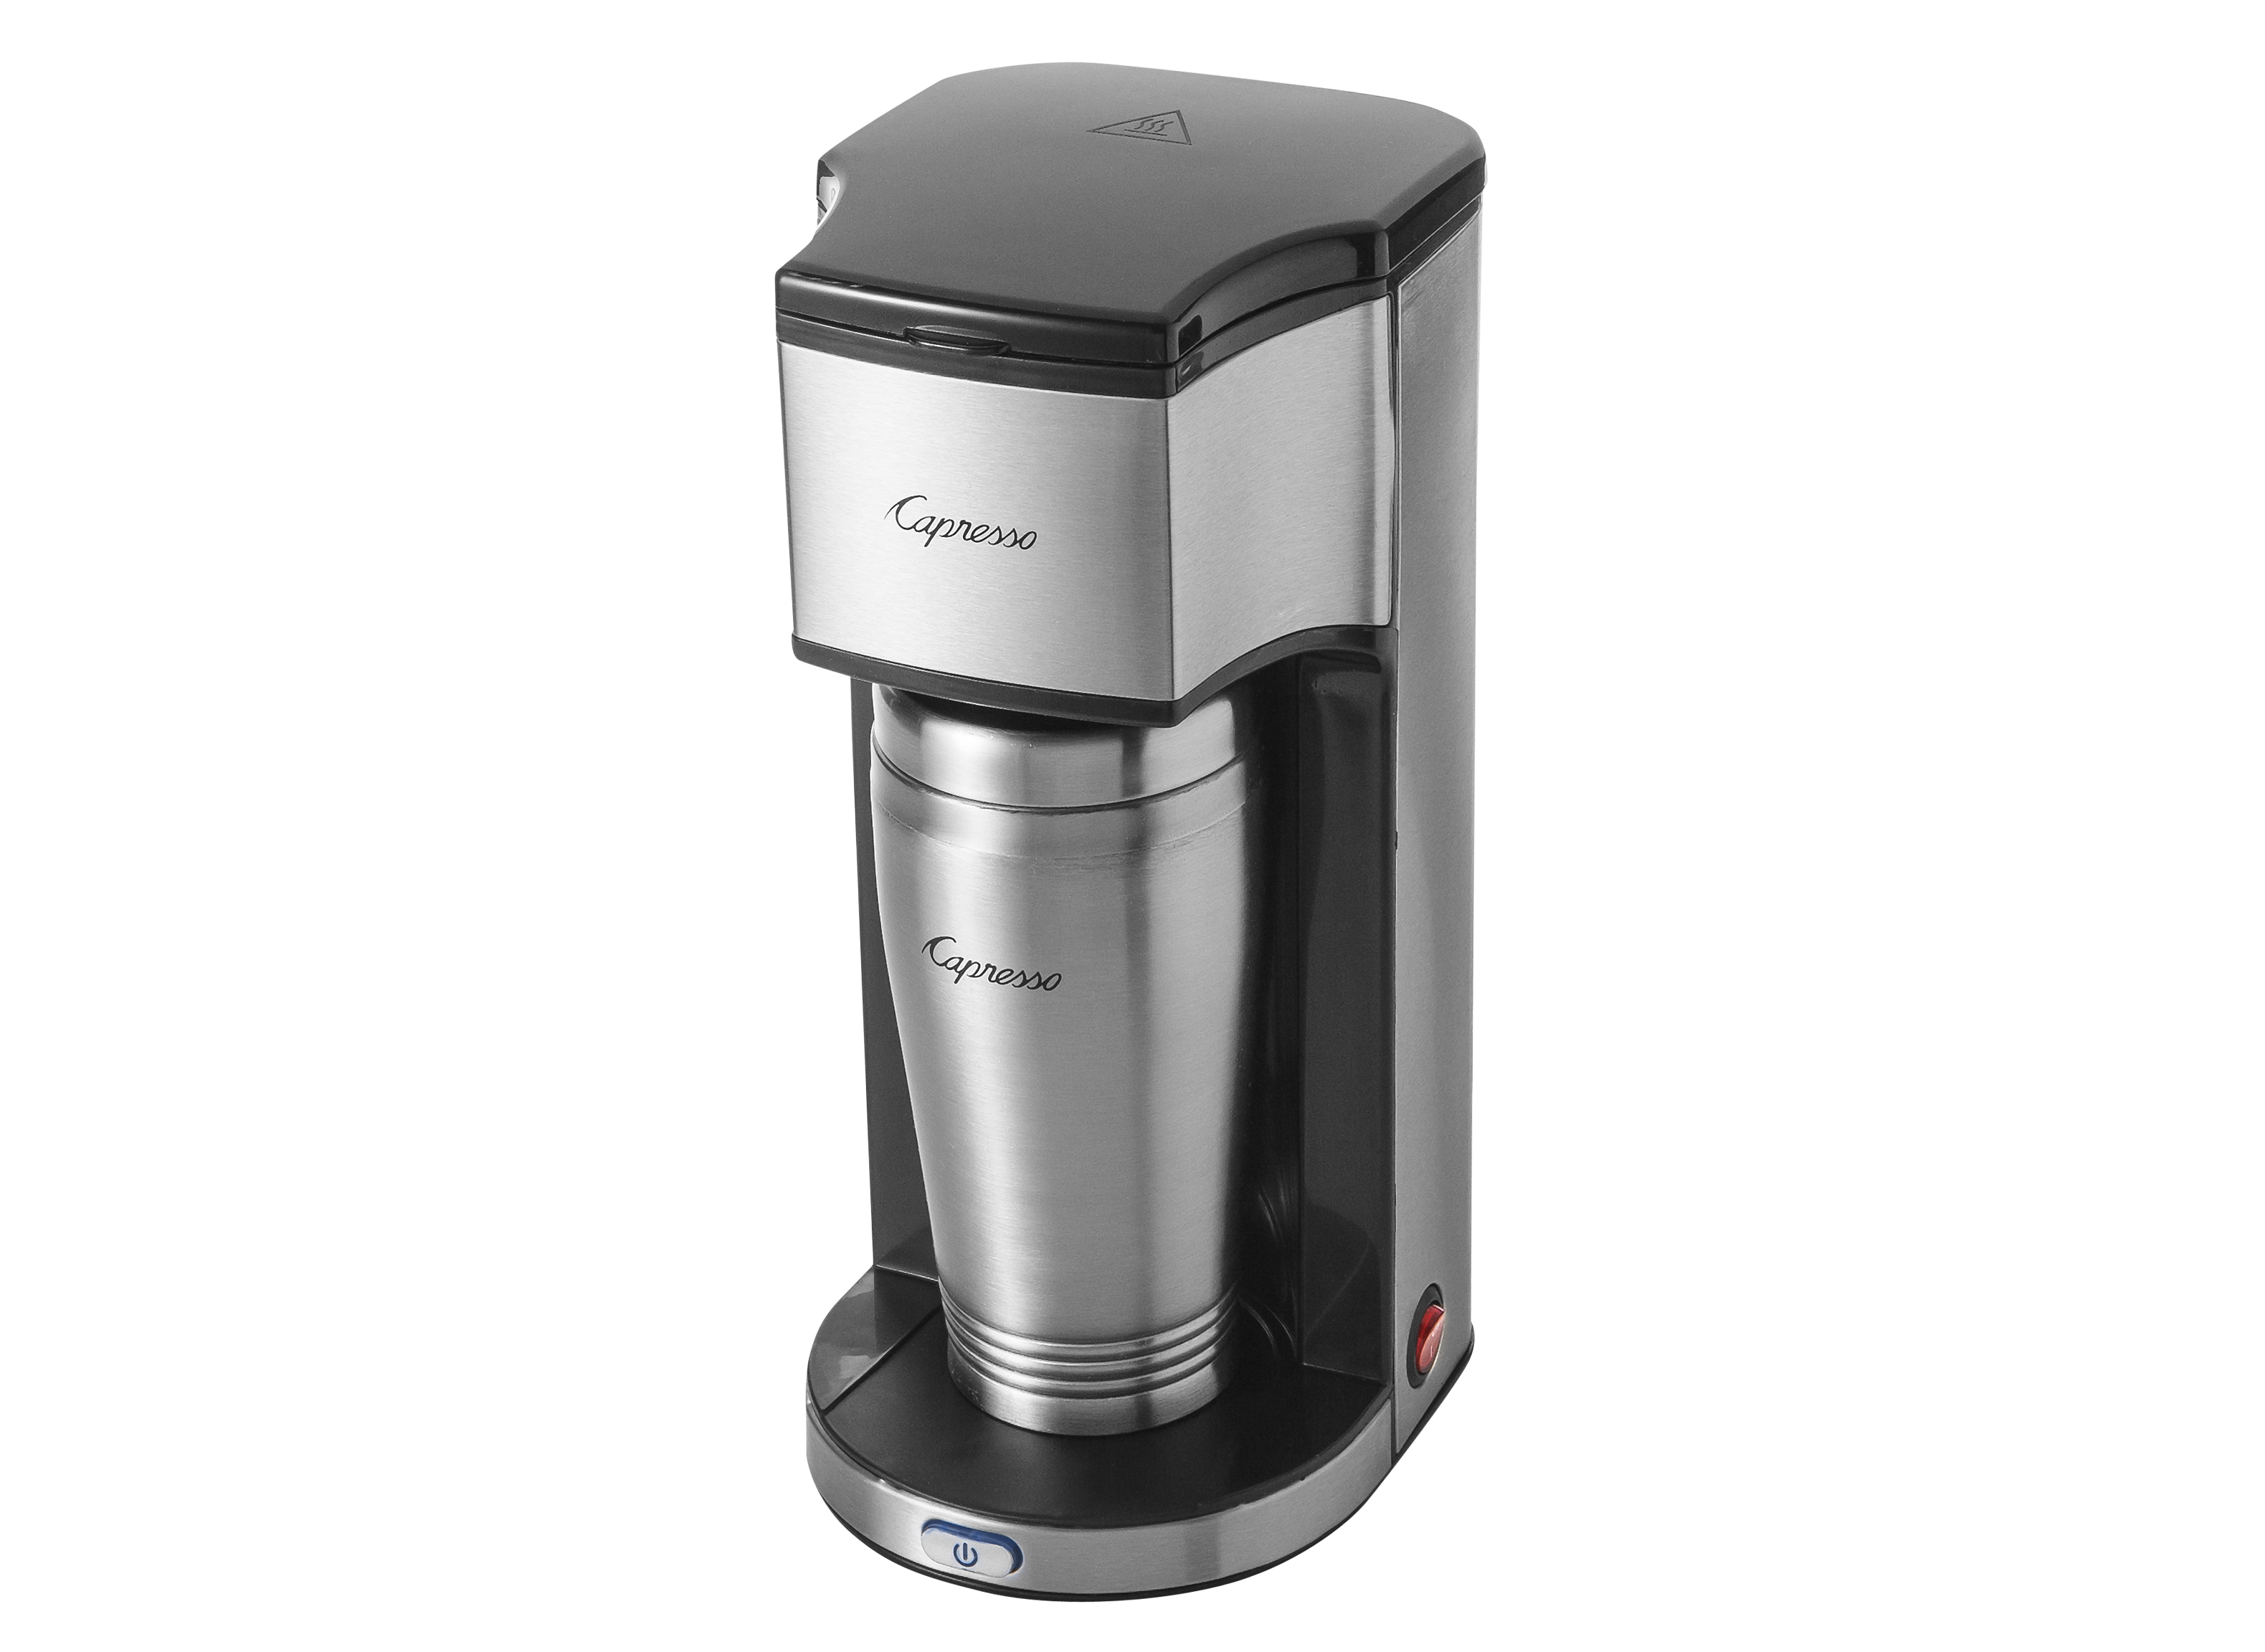 https://crdms.images.consumerreports.org/prod/products/cr/models/267981-coffeemakers-capresso-onthegopersonal42505.png